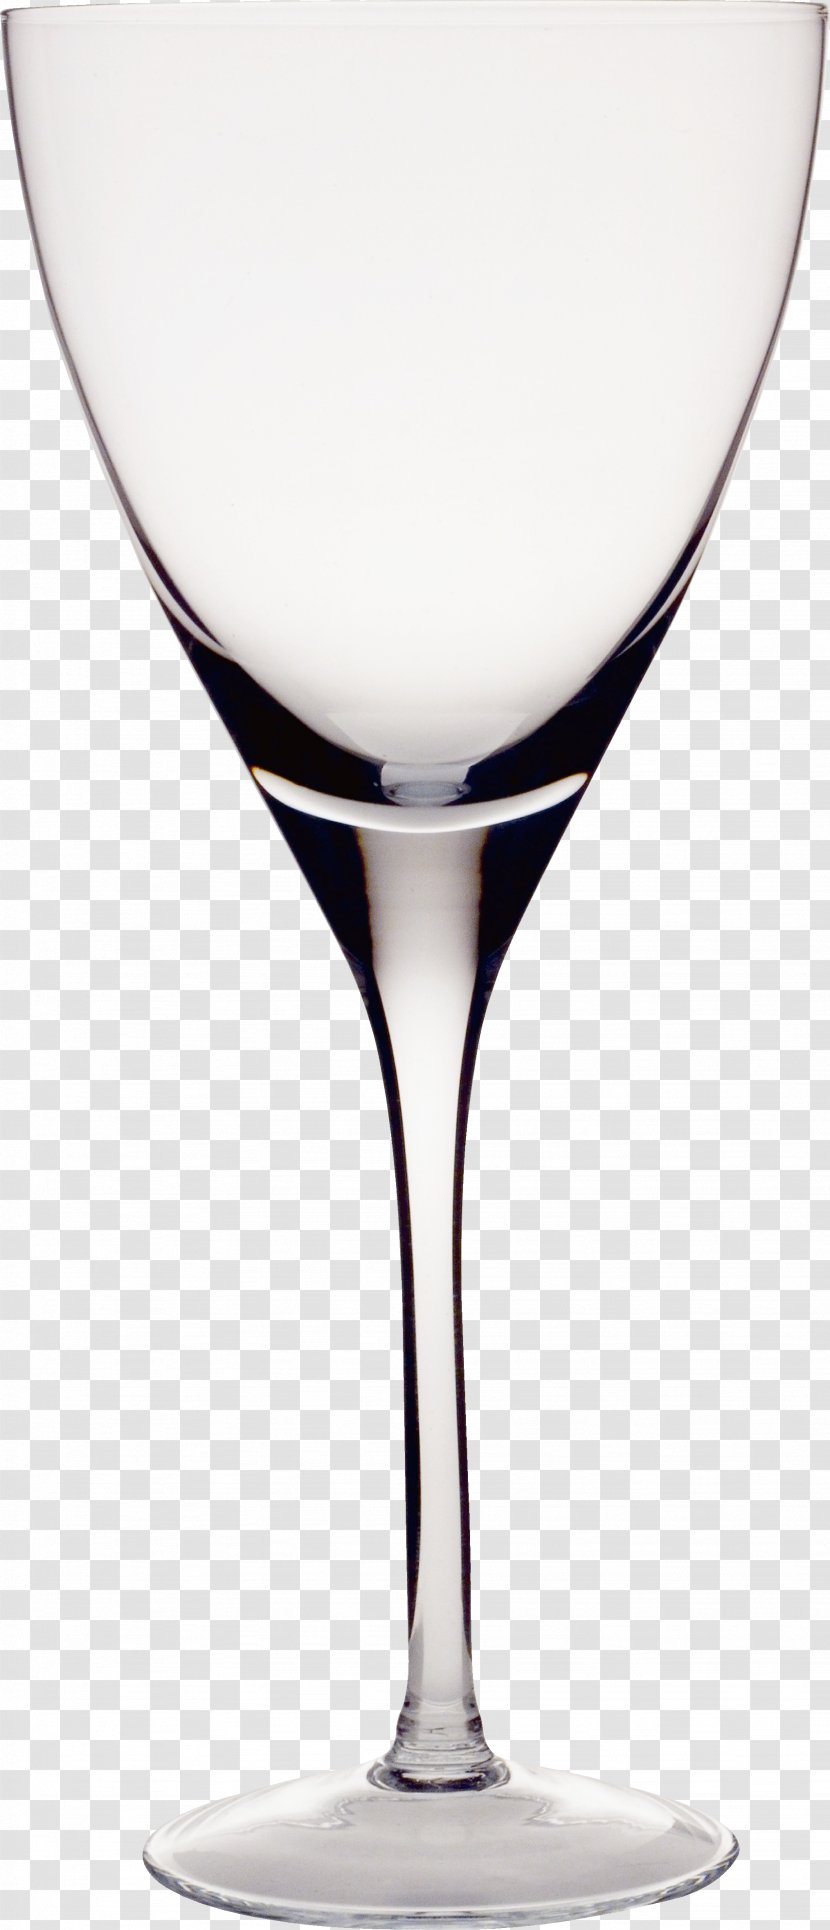 Wine Glass Cocktail Table-glass - Table - Image Transparent PNG